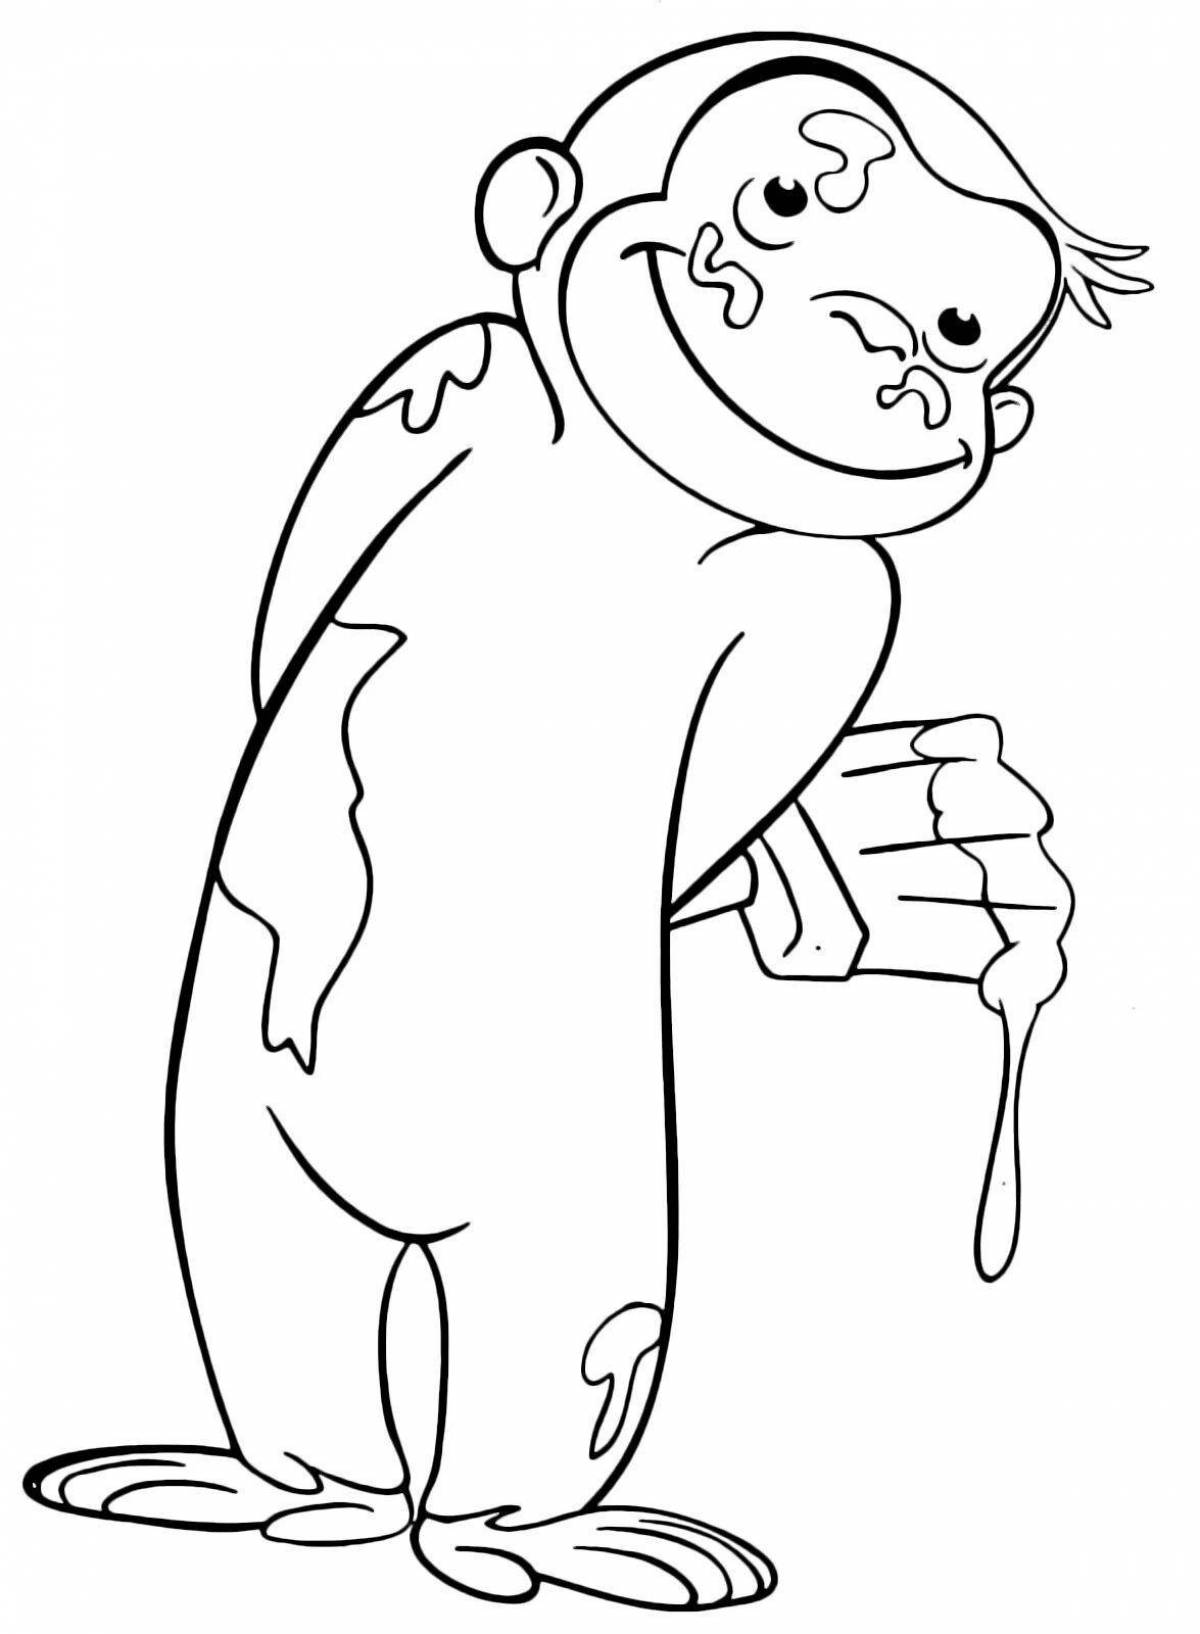 George's involvement coloring page